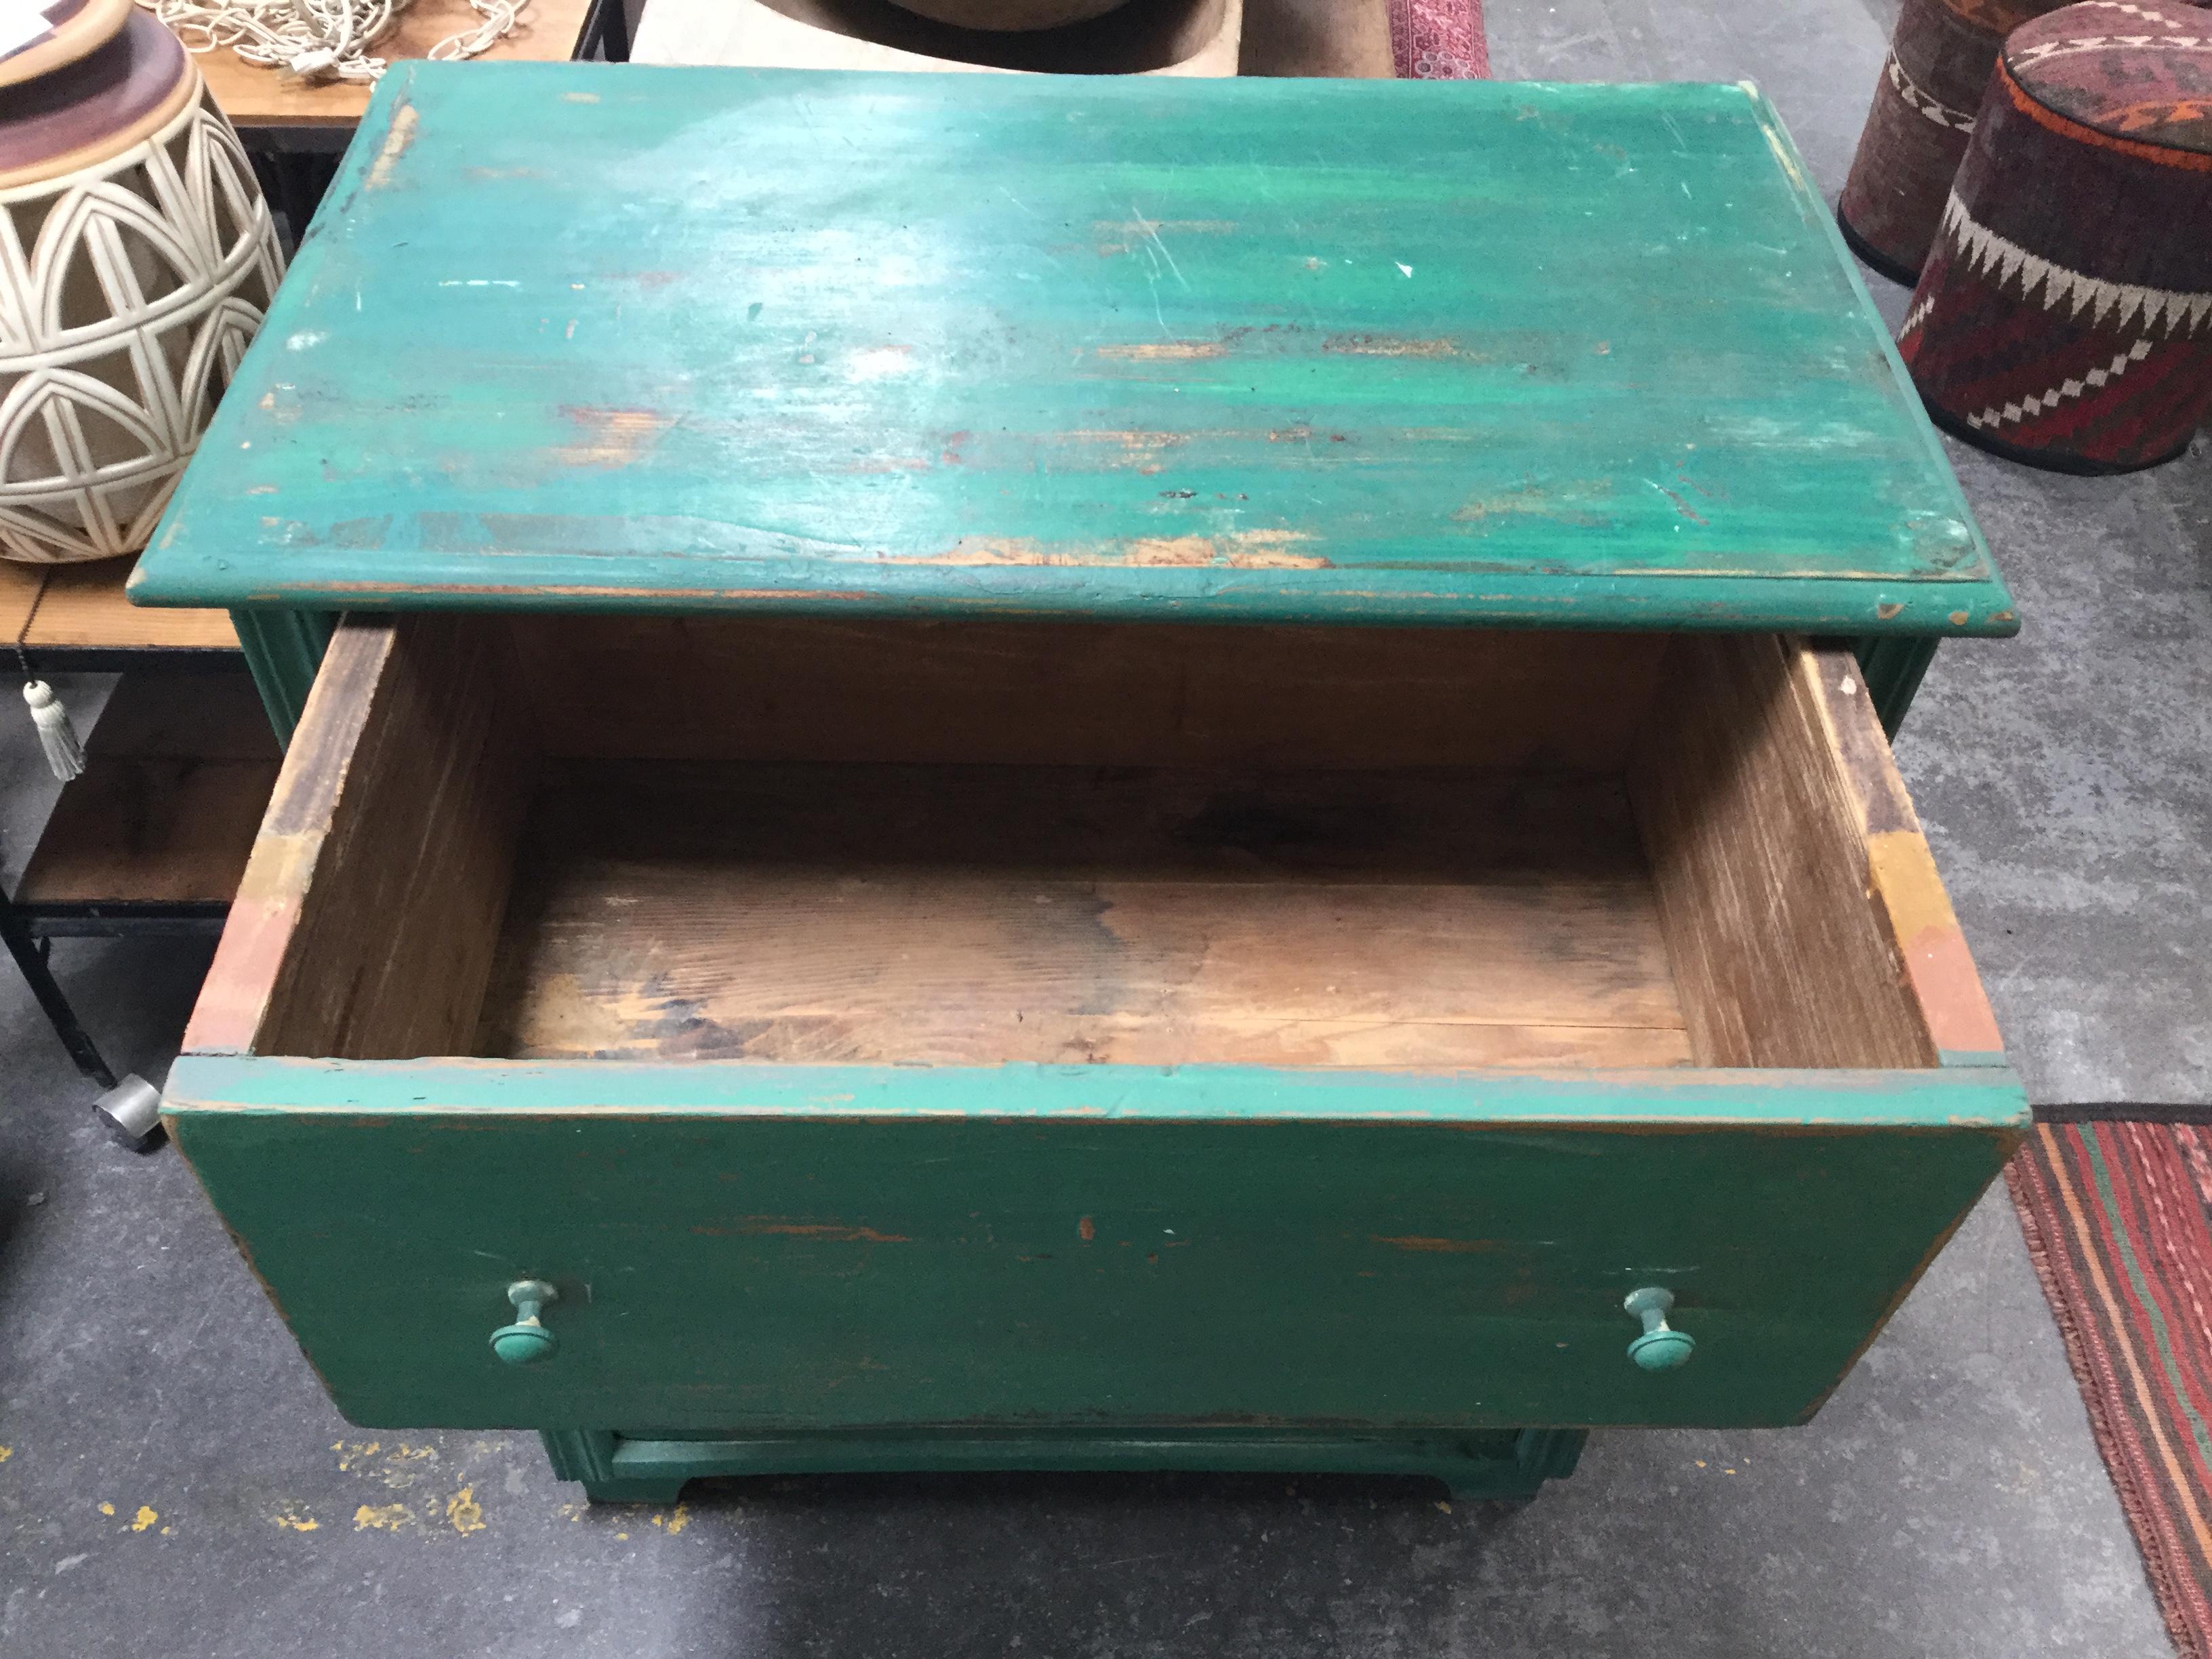 Give a drab corner a charming pop of color, with this gracefully green gem. Plenty of chipped and worn-away charm, with original key as pictured. 
Drawer inner dimensions measure 24.5